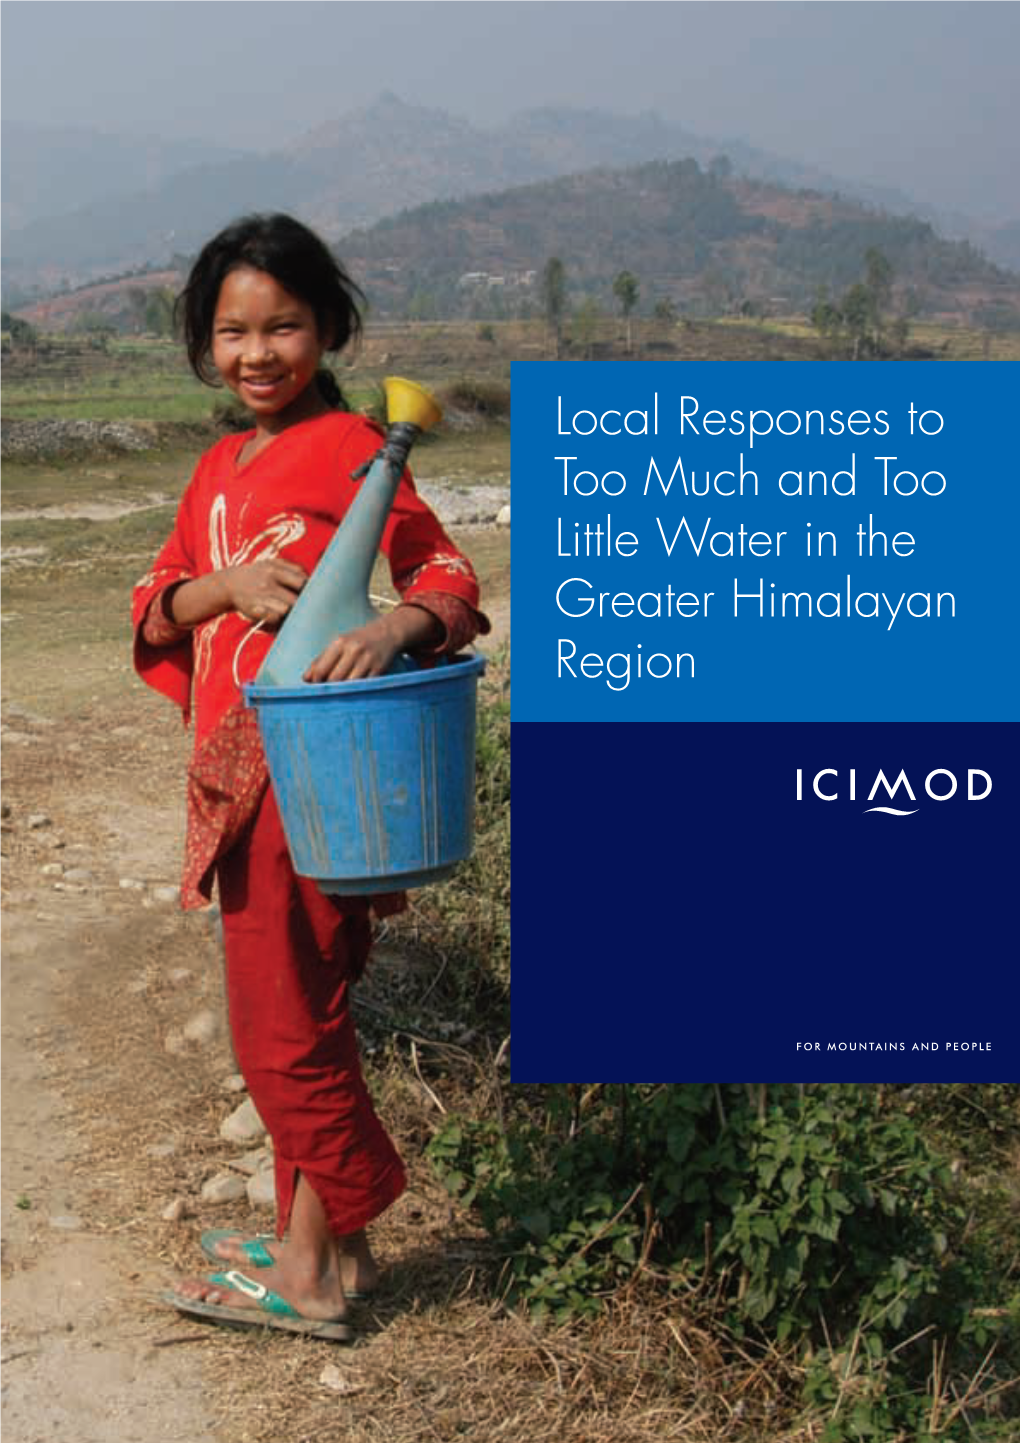 Local Responses to Too Much and Too Little Water in the Greater Himalayan Region About ICIMOD